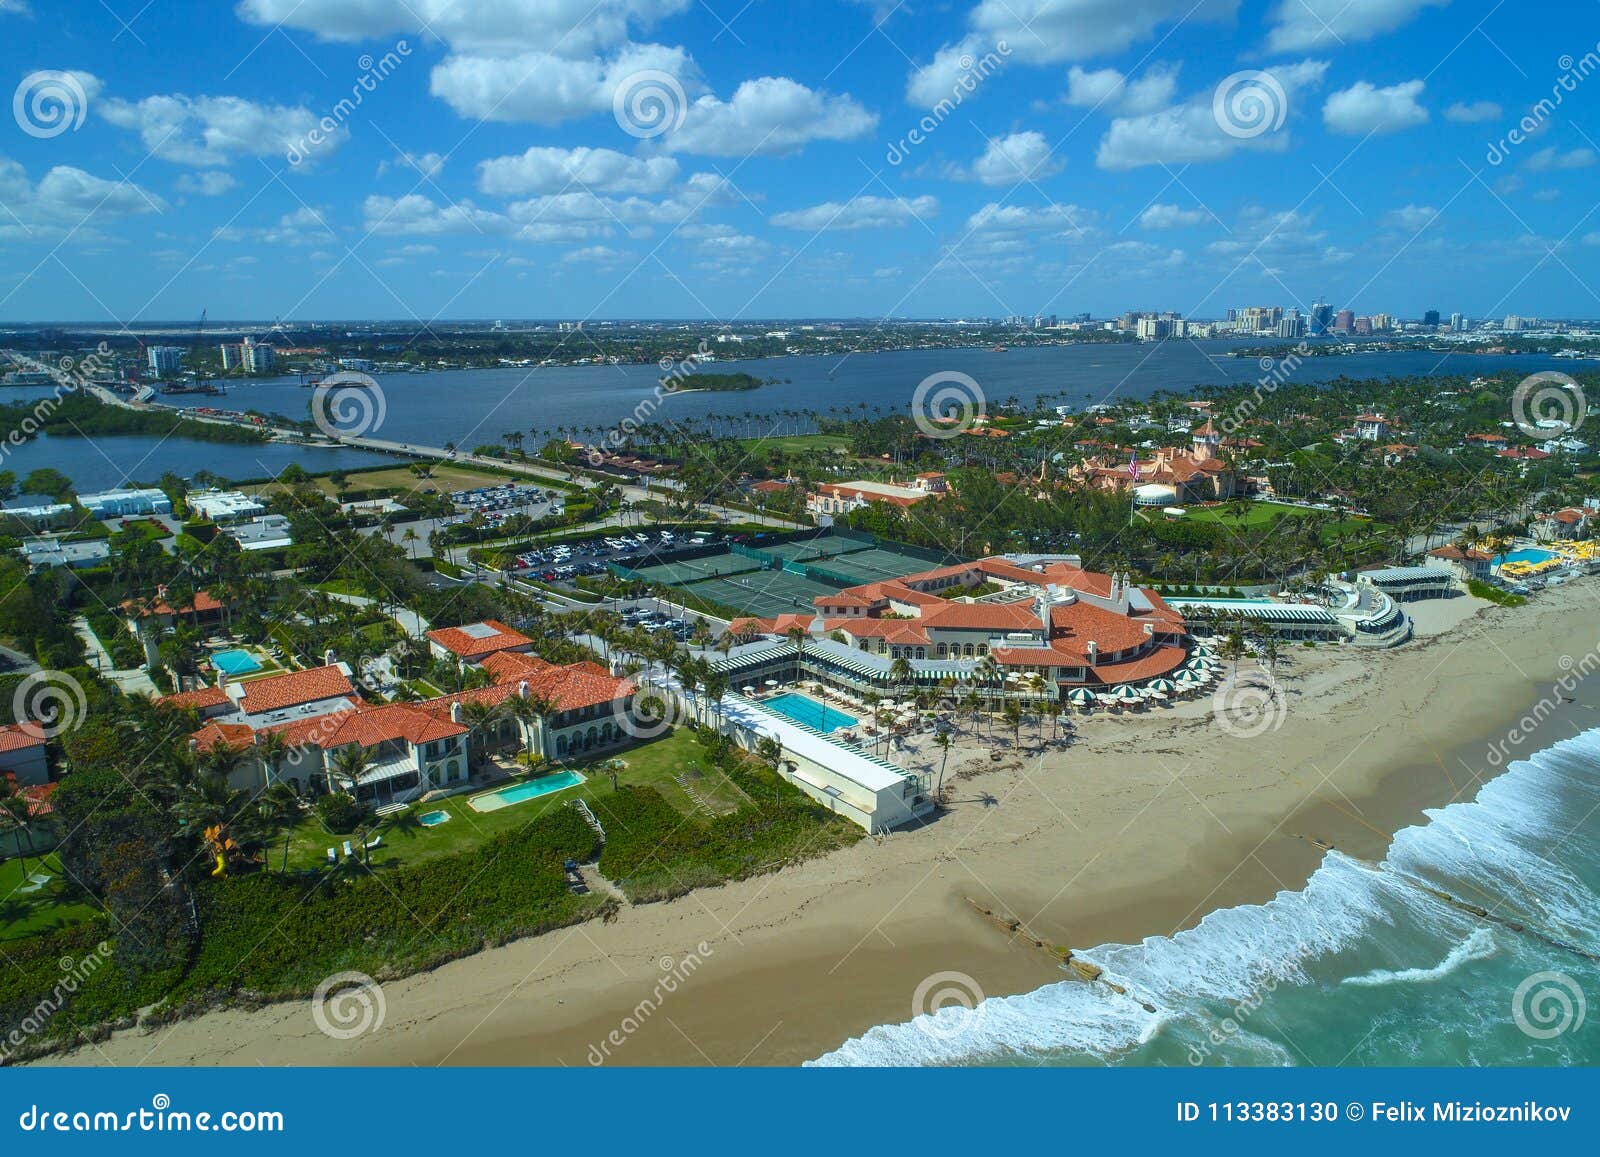 aerial image of mar a lago resort and playground of the wealthy